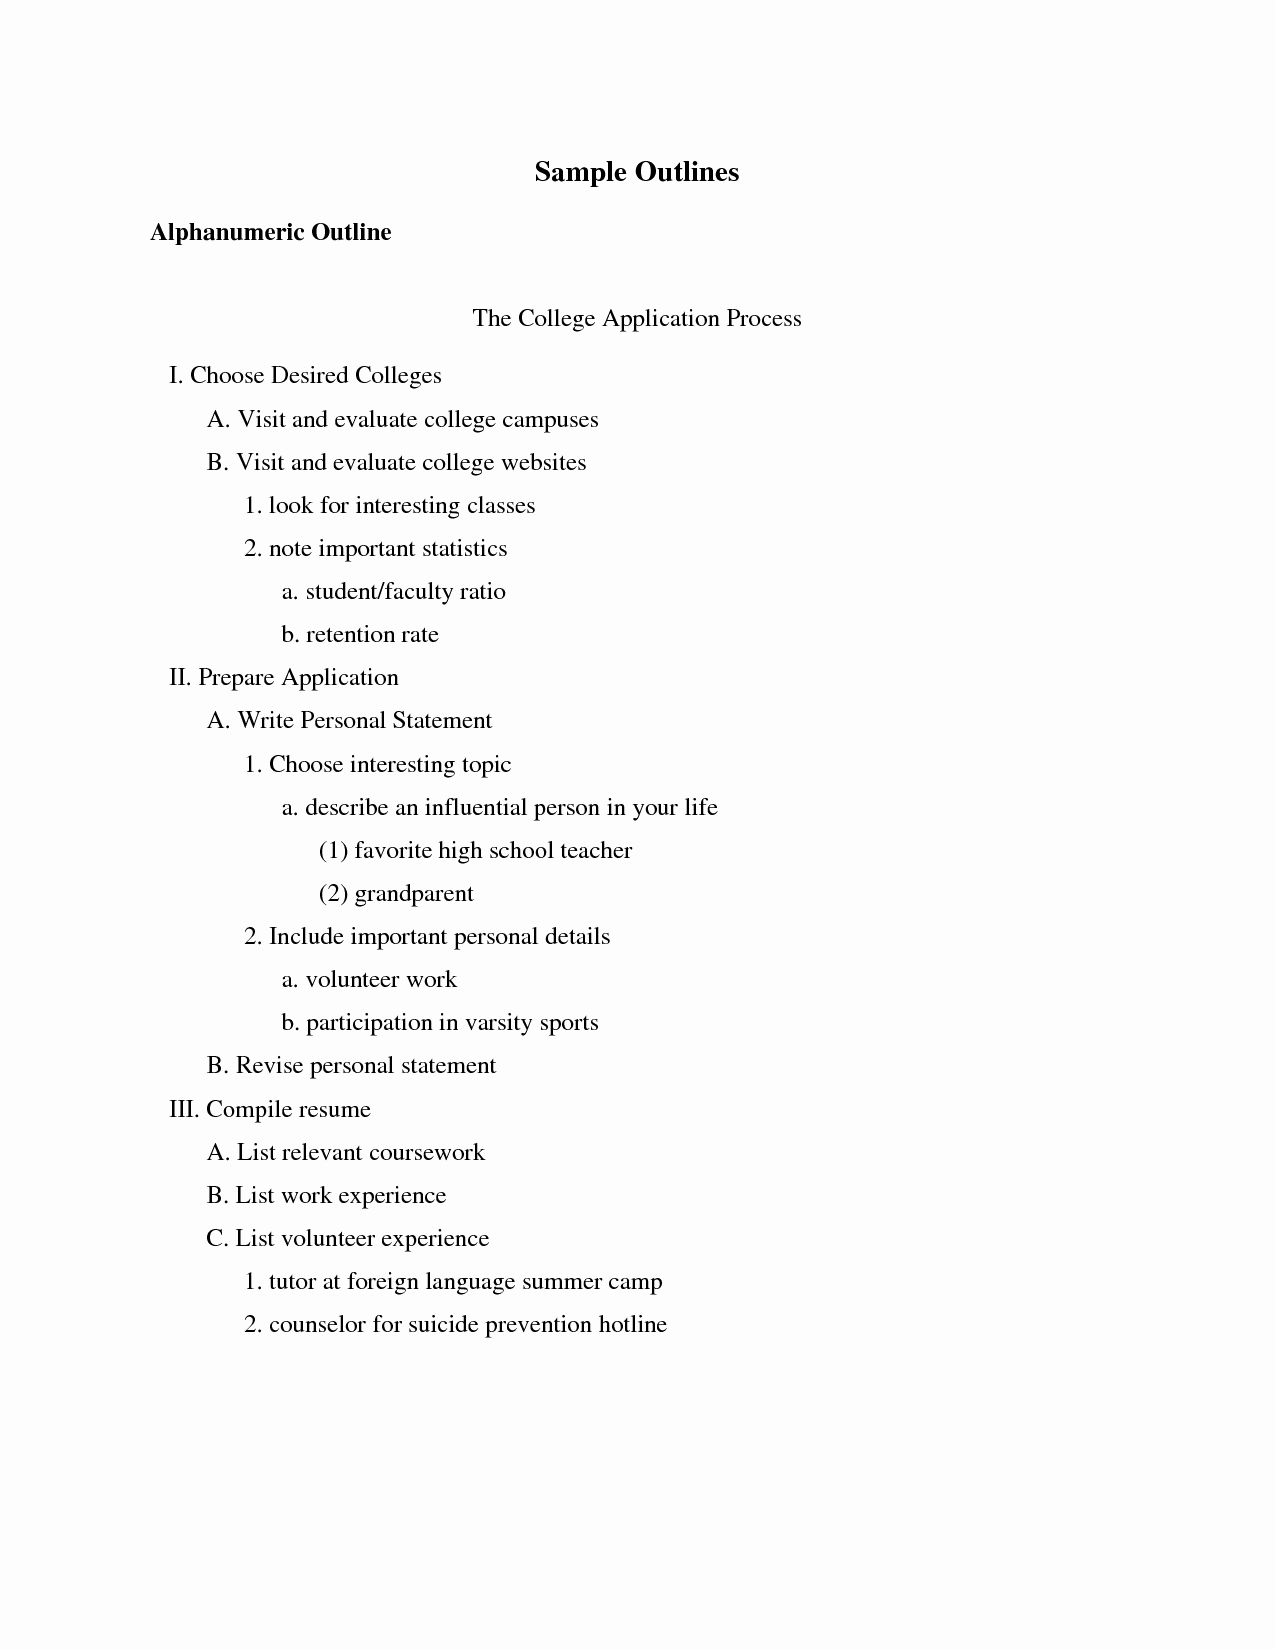 Mla format Outline Template Awesome Best S Of Mla format Outline Mla format Outline